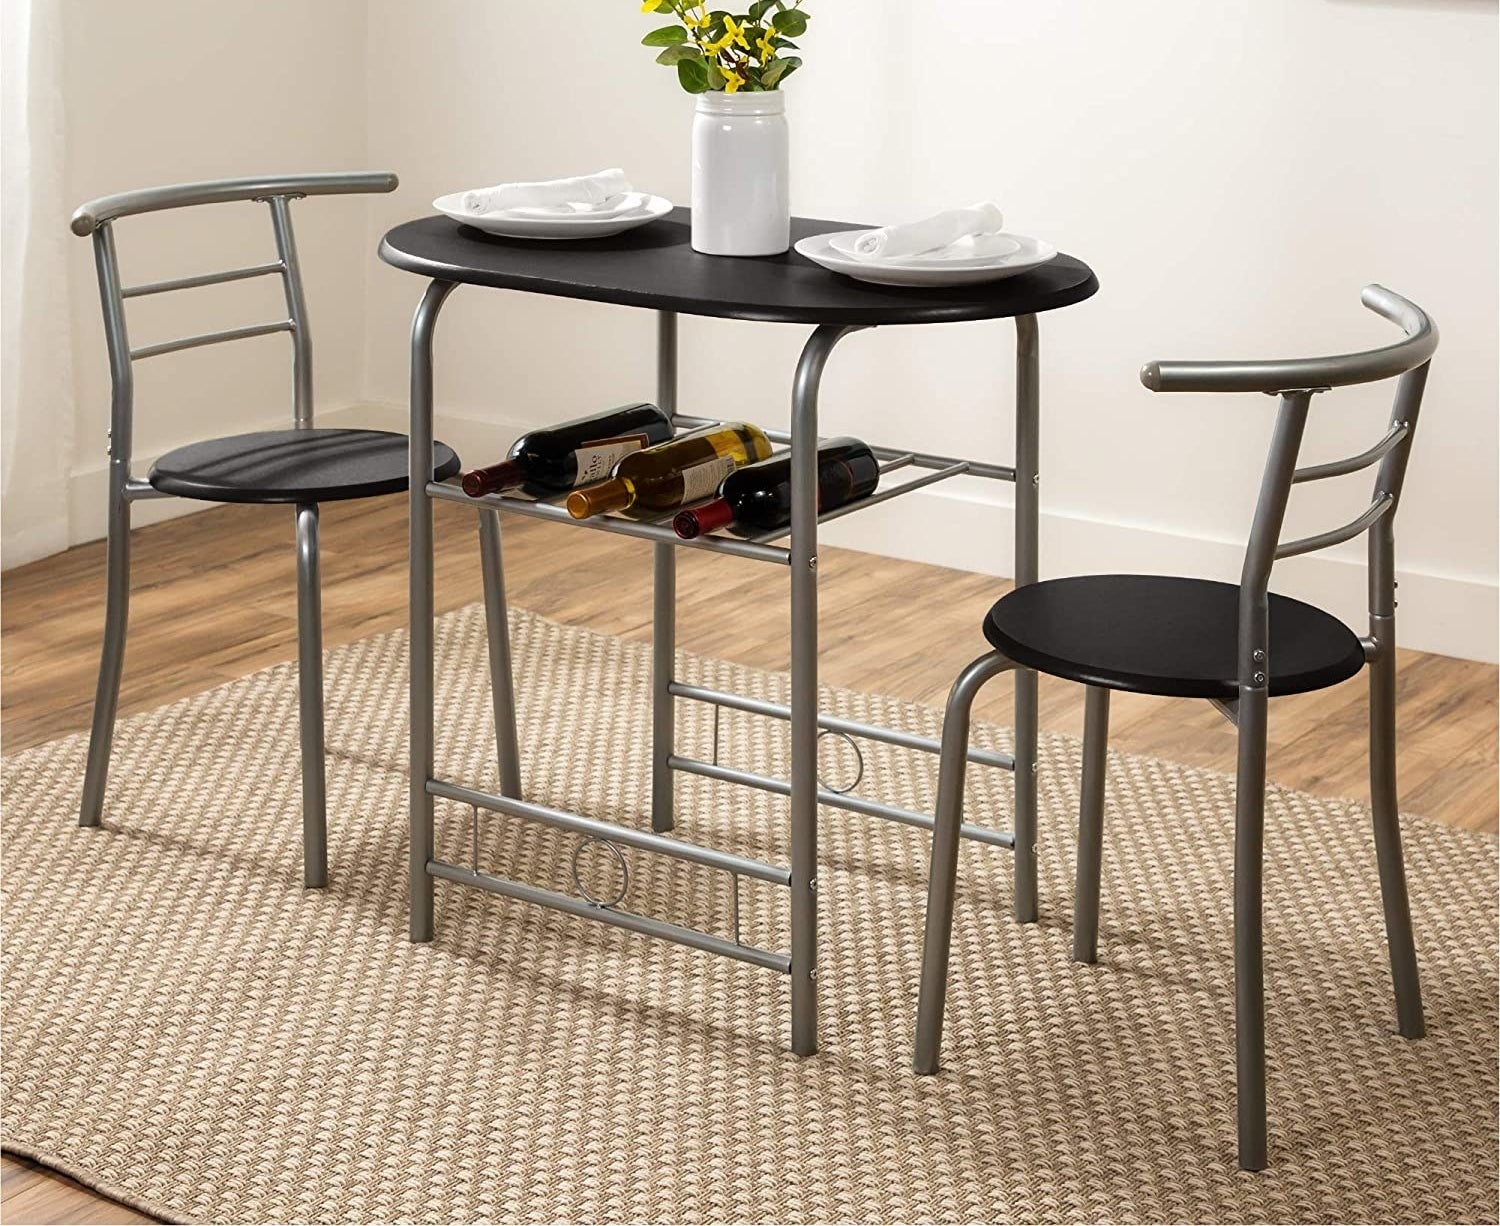 A small oval table with a built-in rack underneath holding wine bottles and two small chairs